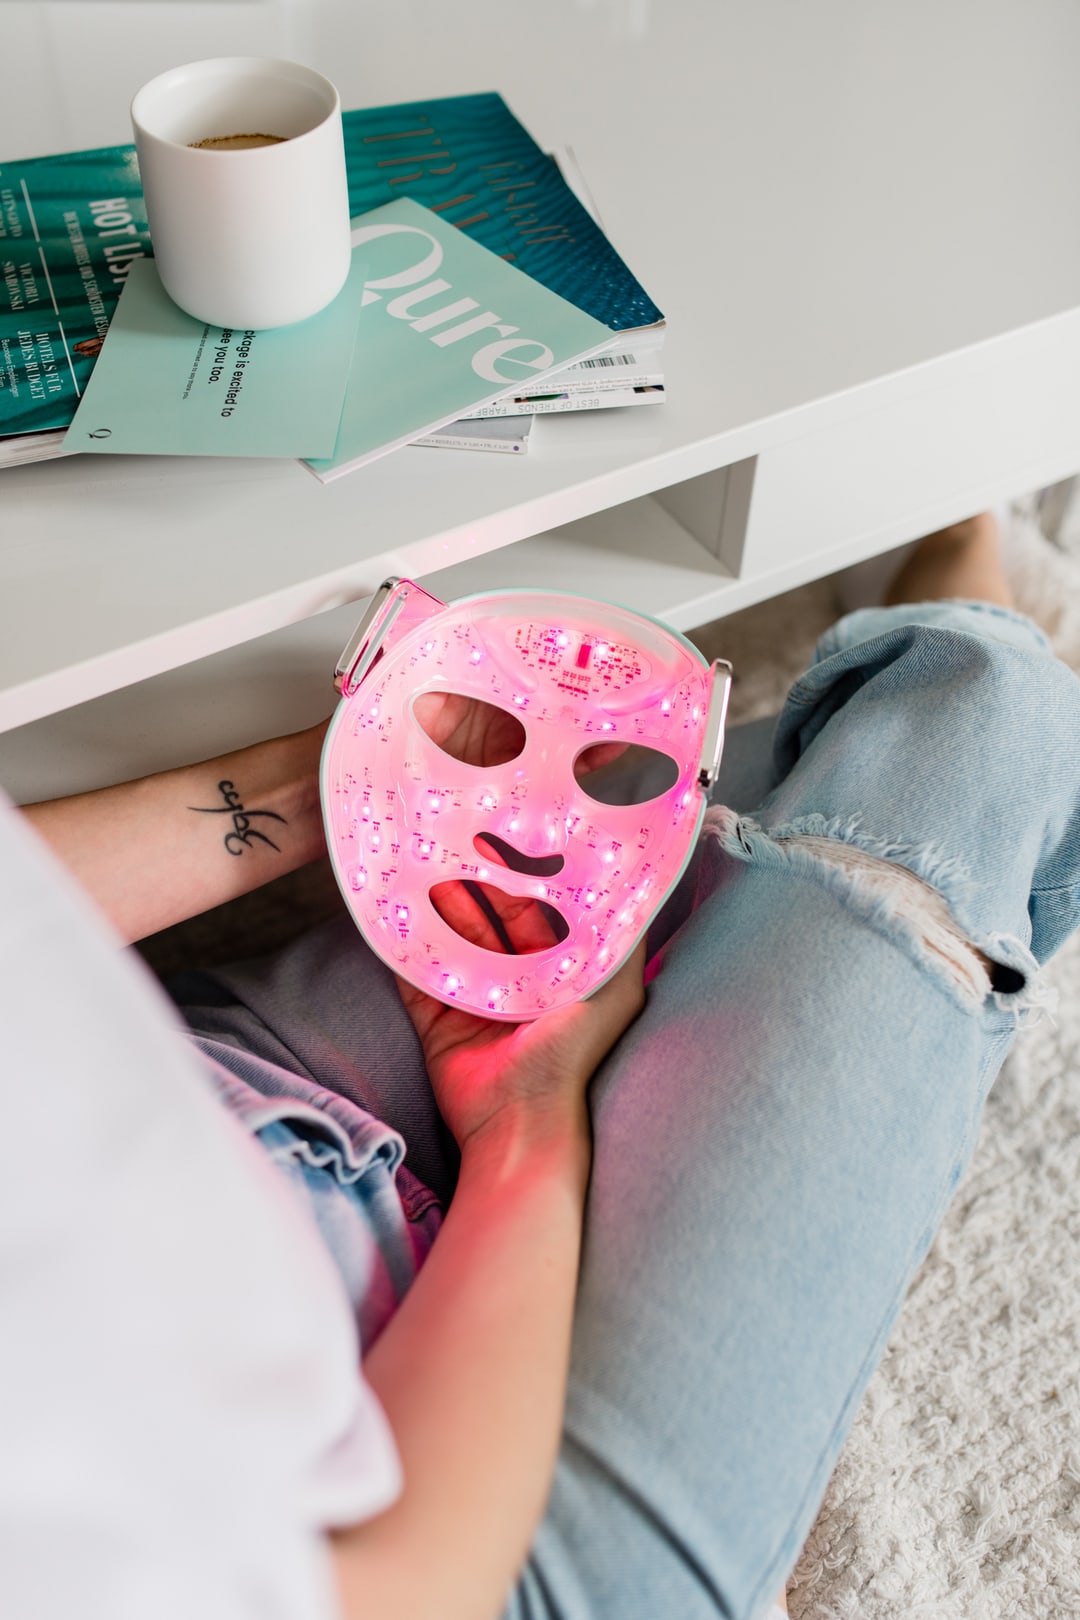 Qure Led Light Therapy Mask